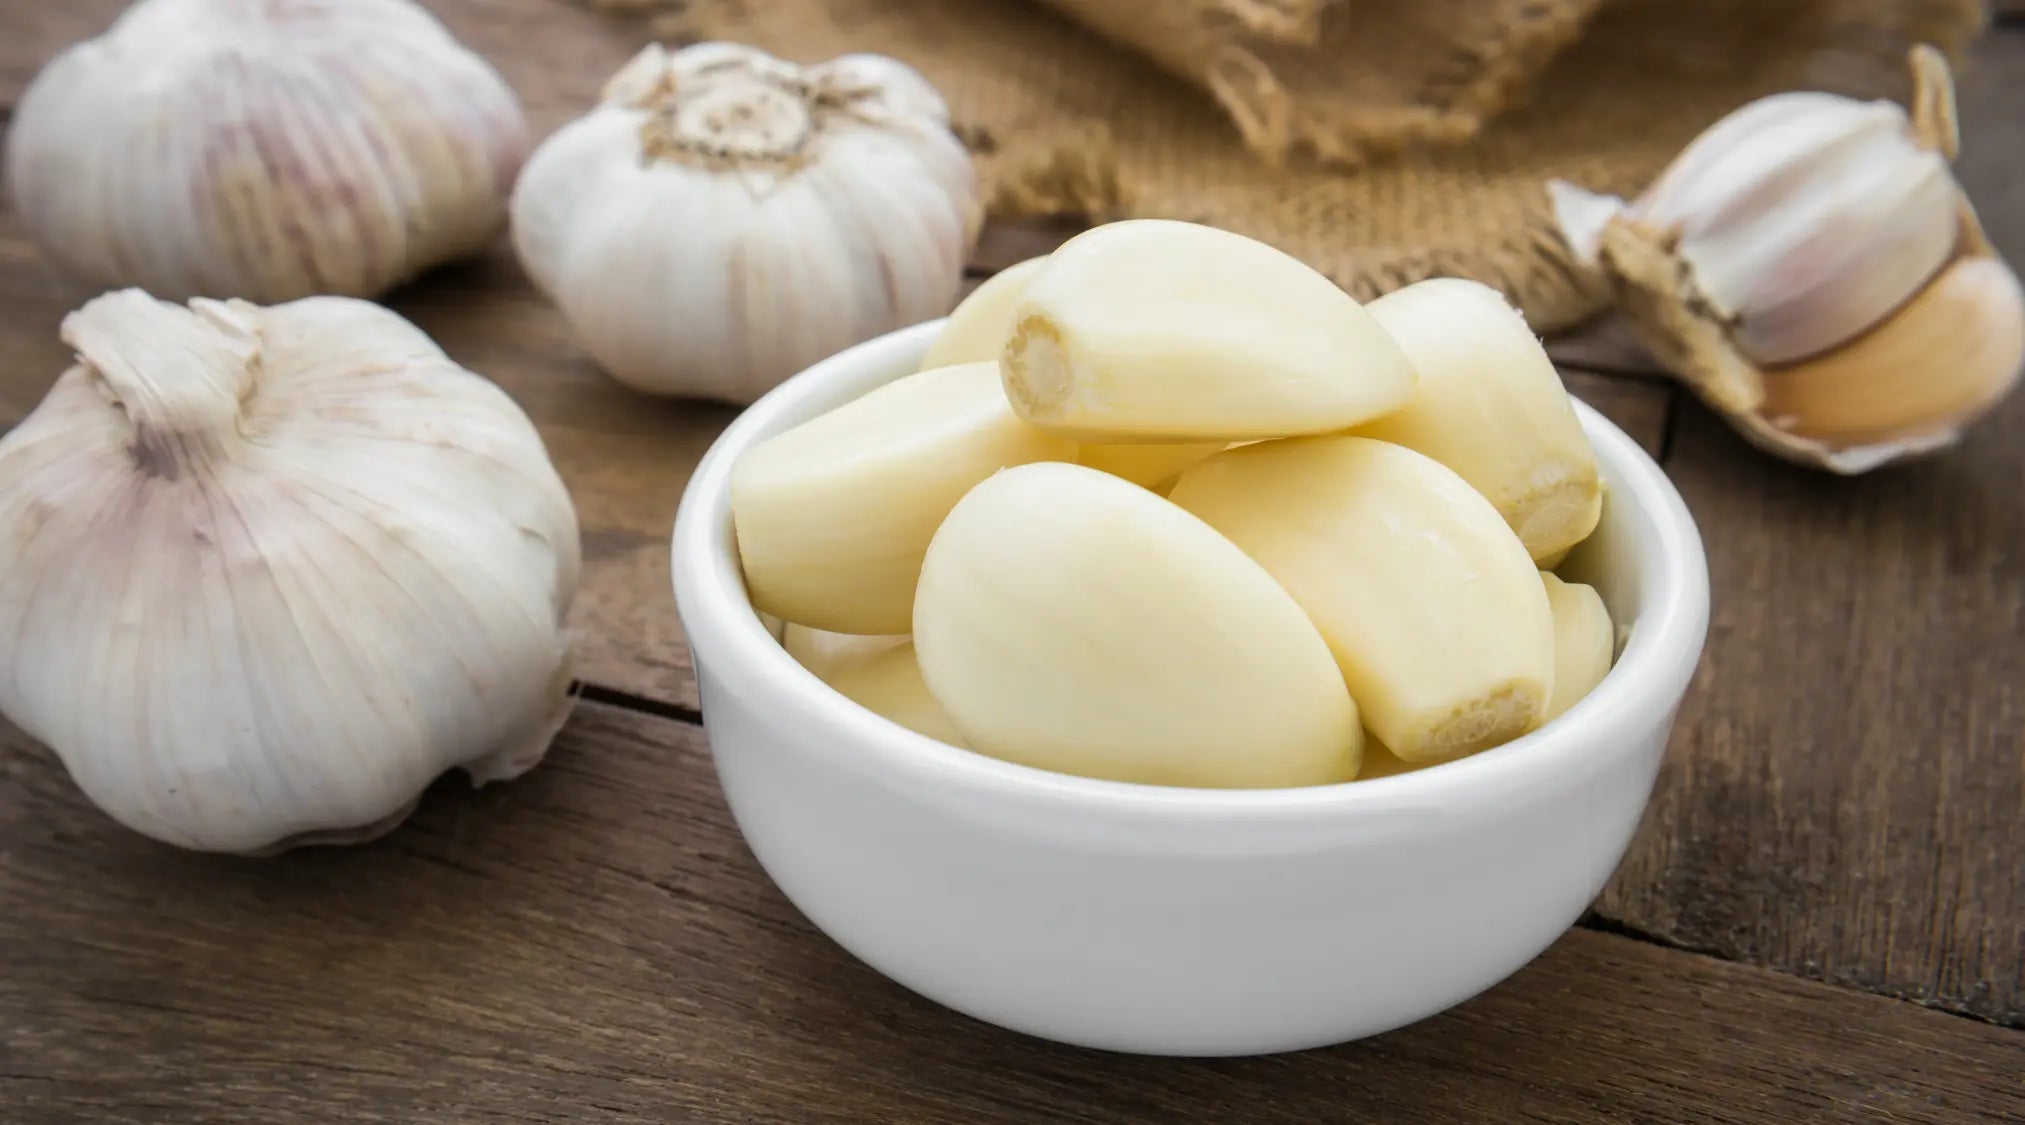 Is Garlic Good For Gout? Scientific Evidence, How To Use, and More Helpful Tips